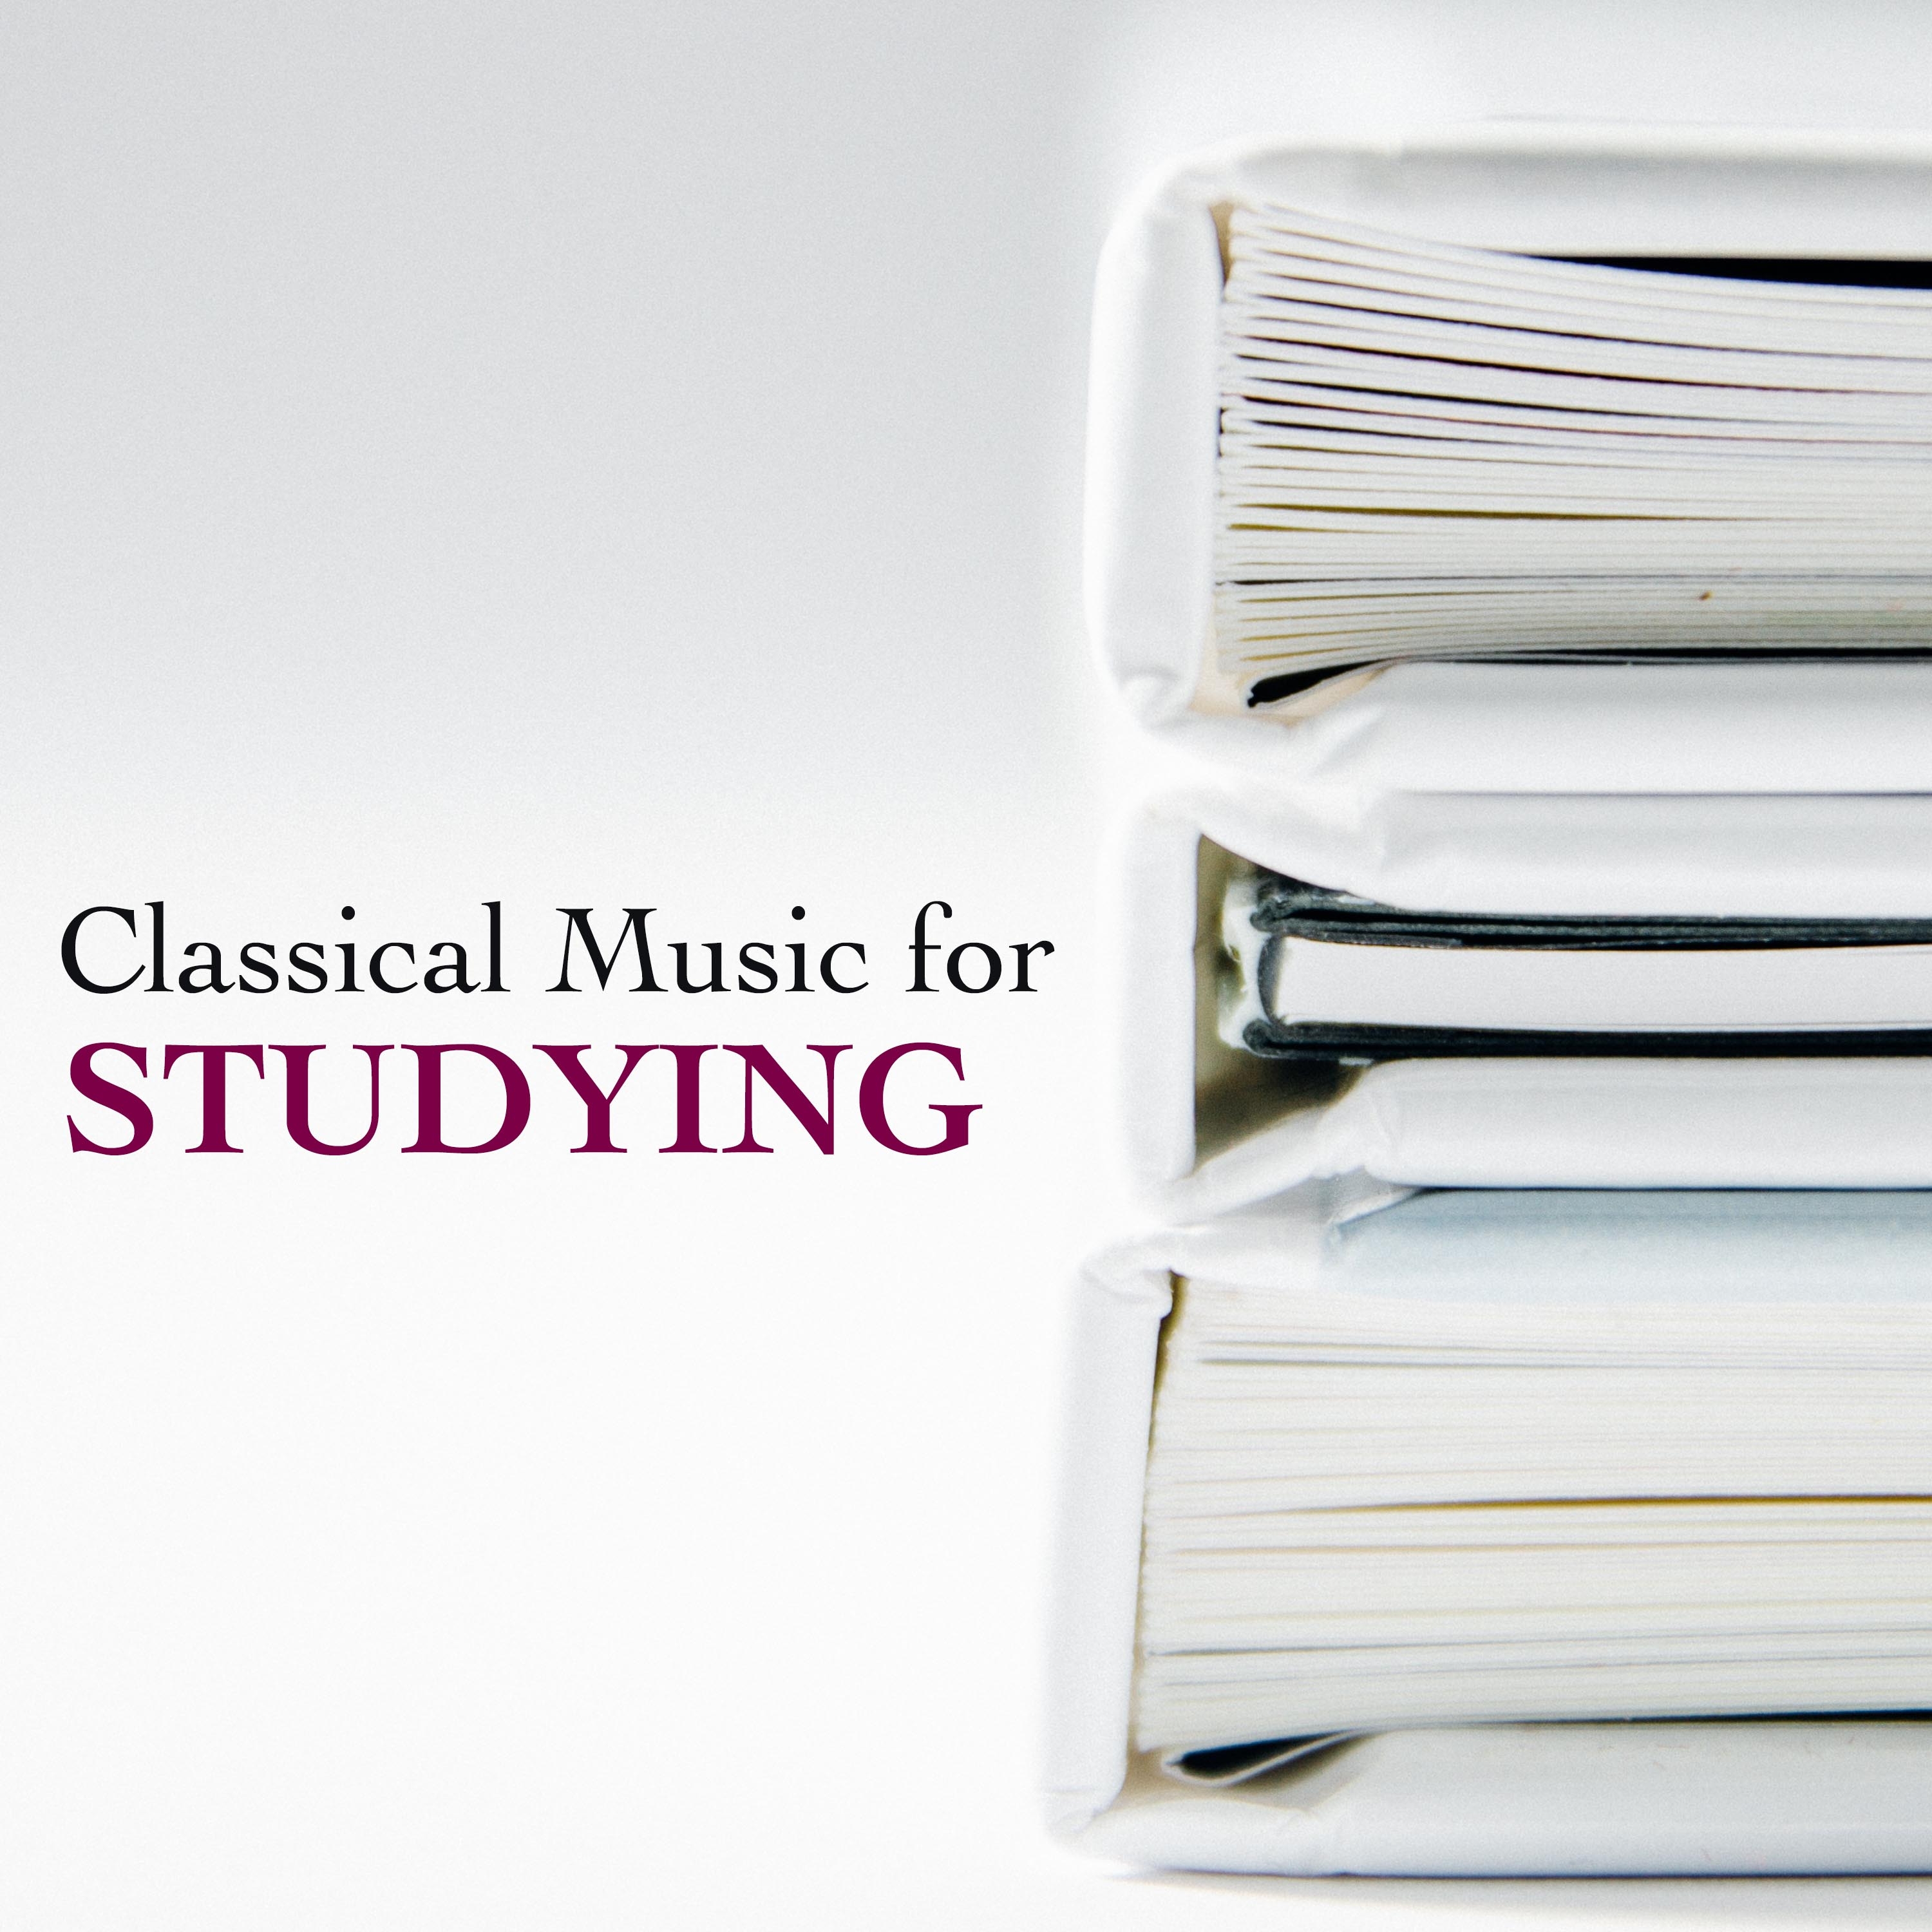 Classical Music for Studying: Best Soft Concentration Music to Listen to while Studying, Reading or Working